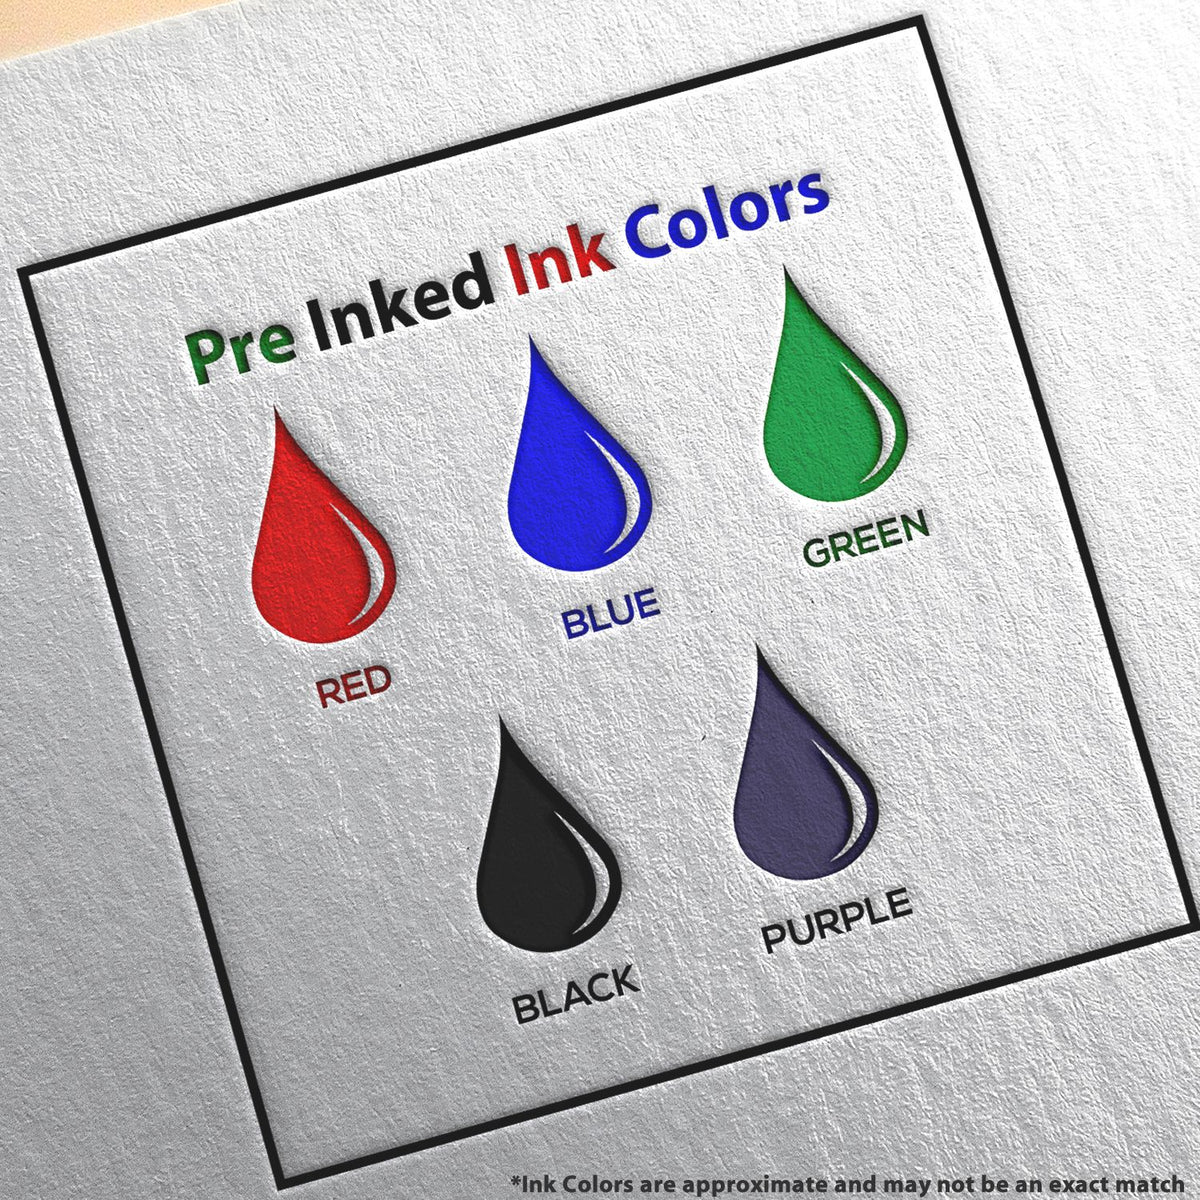 A picture showing the different ink colors or hues available for the Slim Pre-Inked Arizona Professional Engineer Seal Stamp product.